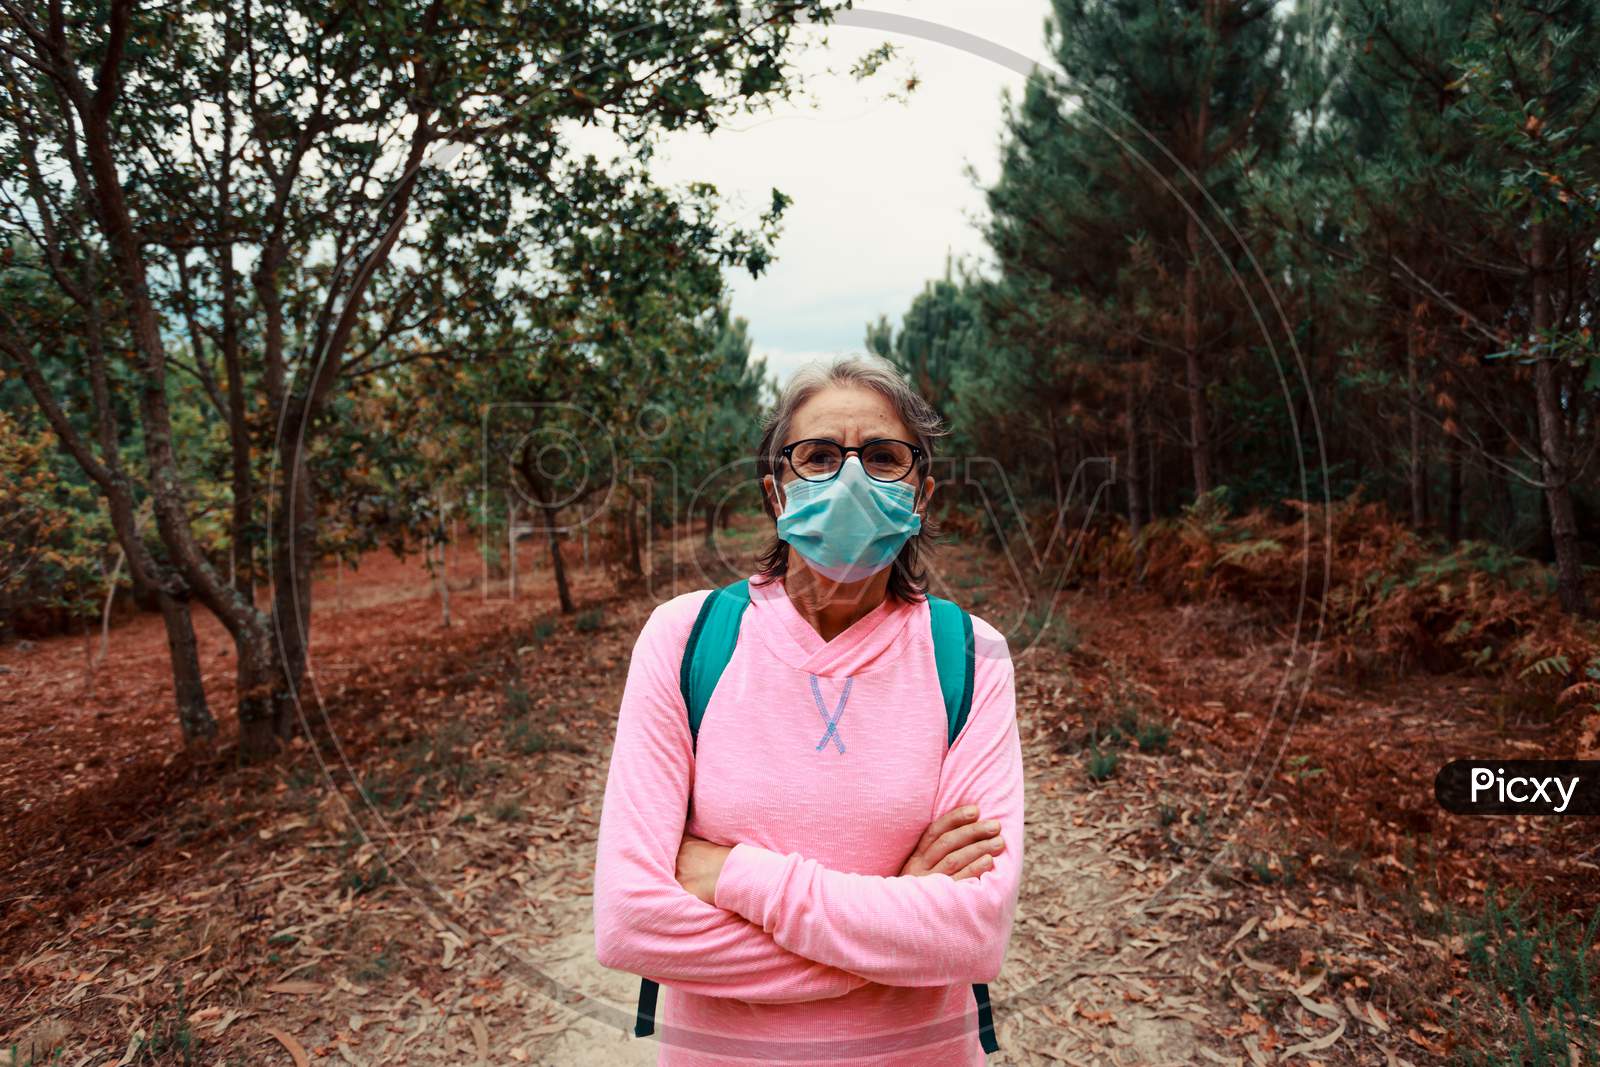 Frontal Portrait Of An Old Woman Wearing A Mask And Sport Clothes In The Forest During A Trekking Day